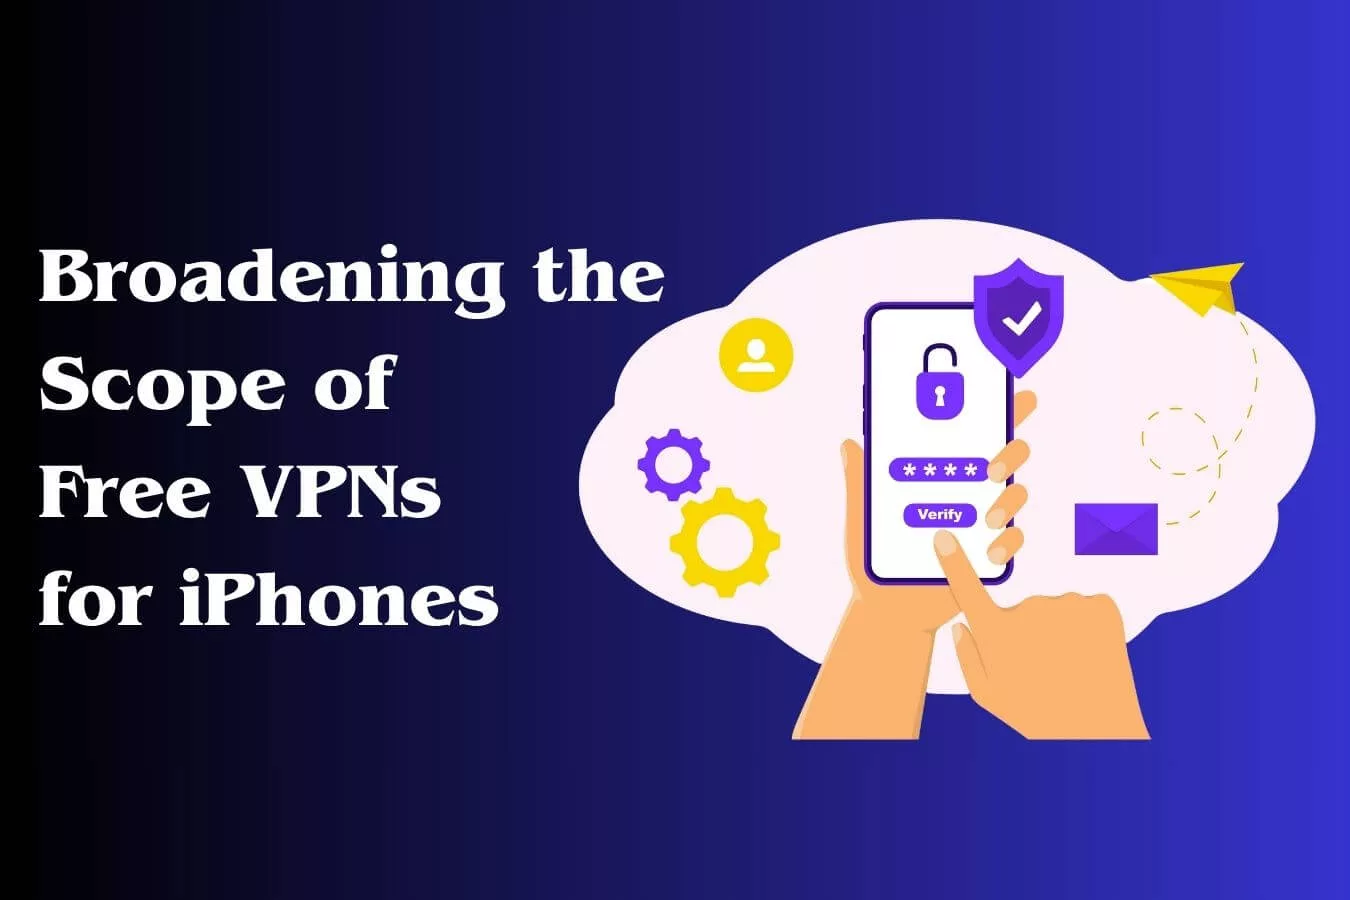 Broadening the Scope of Free VPNs for iPhone